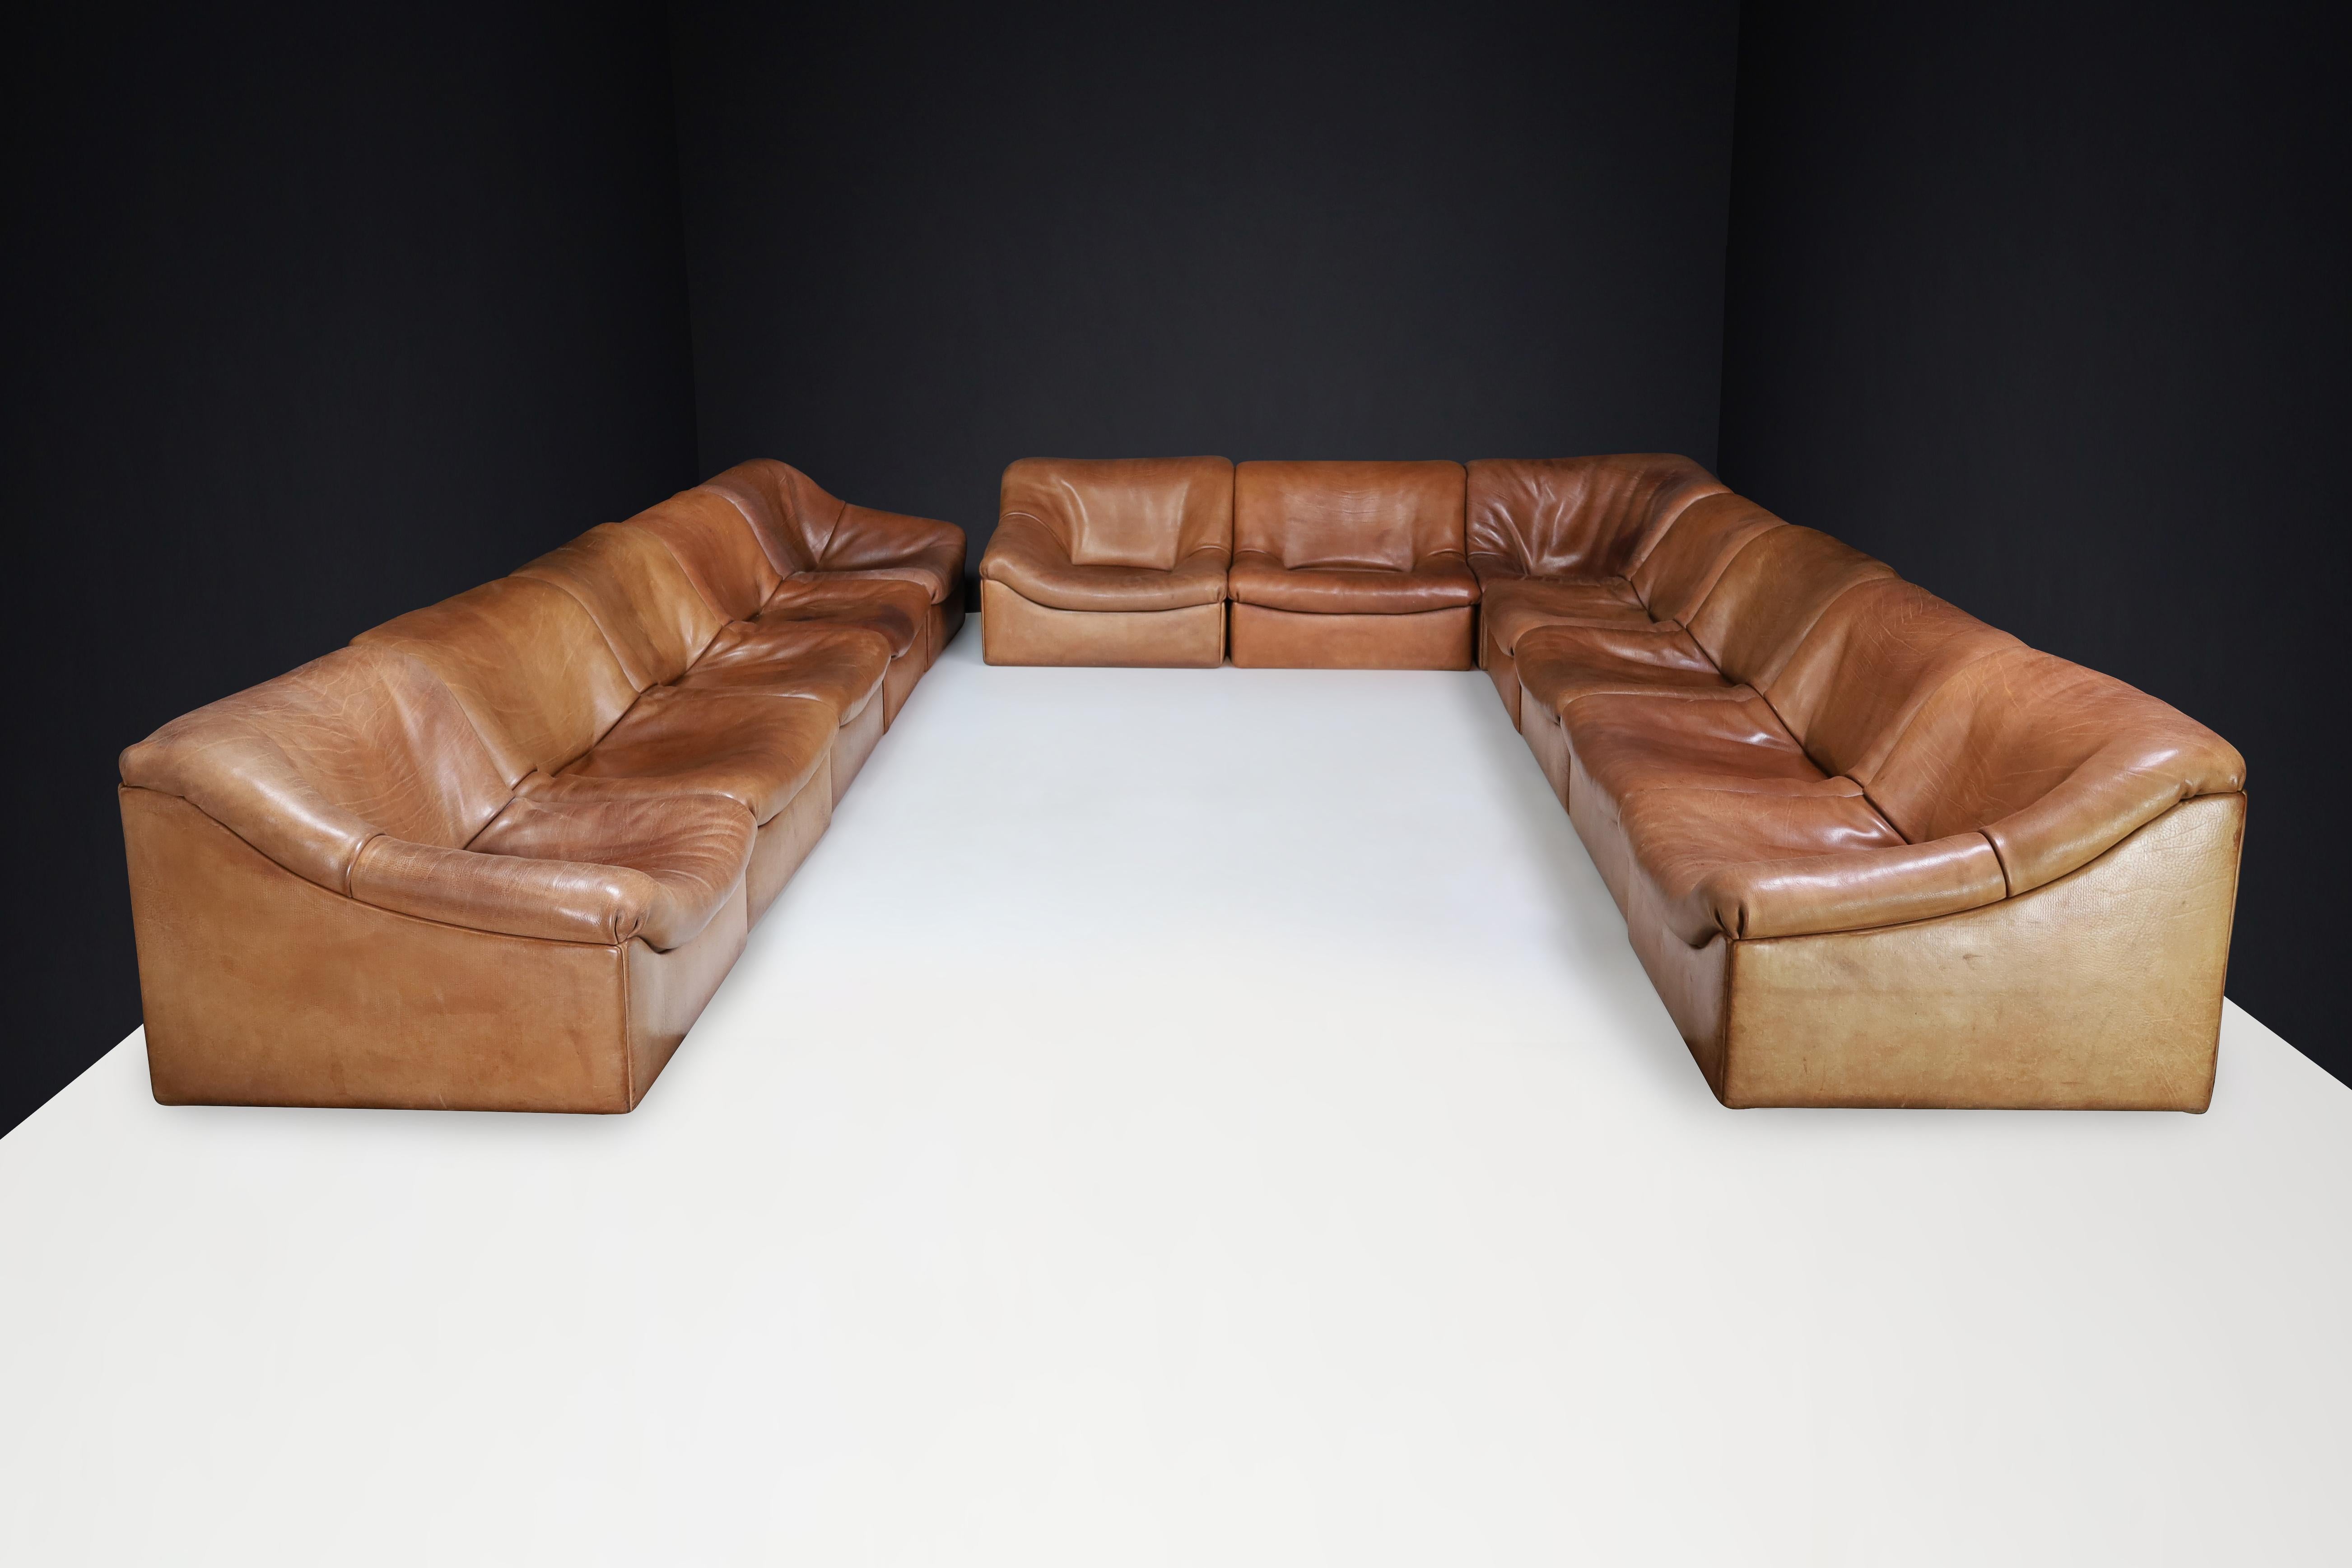 De Sede DS46 Sectional sofa-Living room set in Patinated Cognac Brown Buffalo Leather, Switzerland 1970s

This twelve-piece De Sede DS 46 sectional sofa-living room set is a one-of-a-kind piece, crafted from thick cognac leather and boasting a sleek